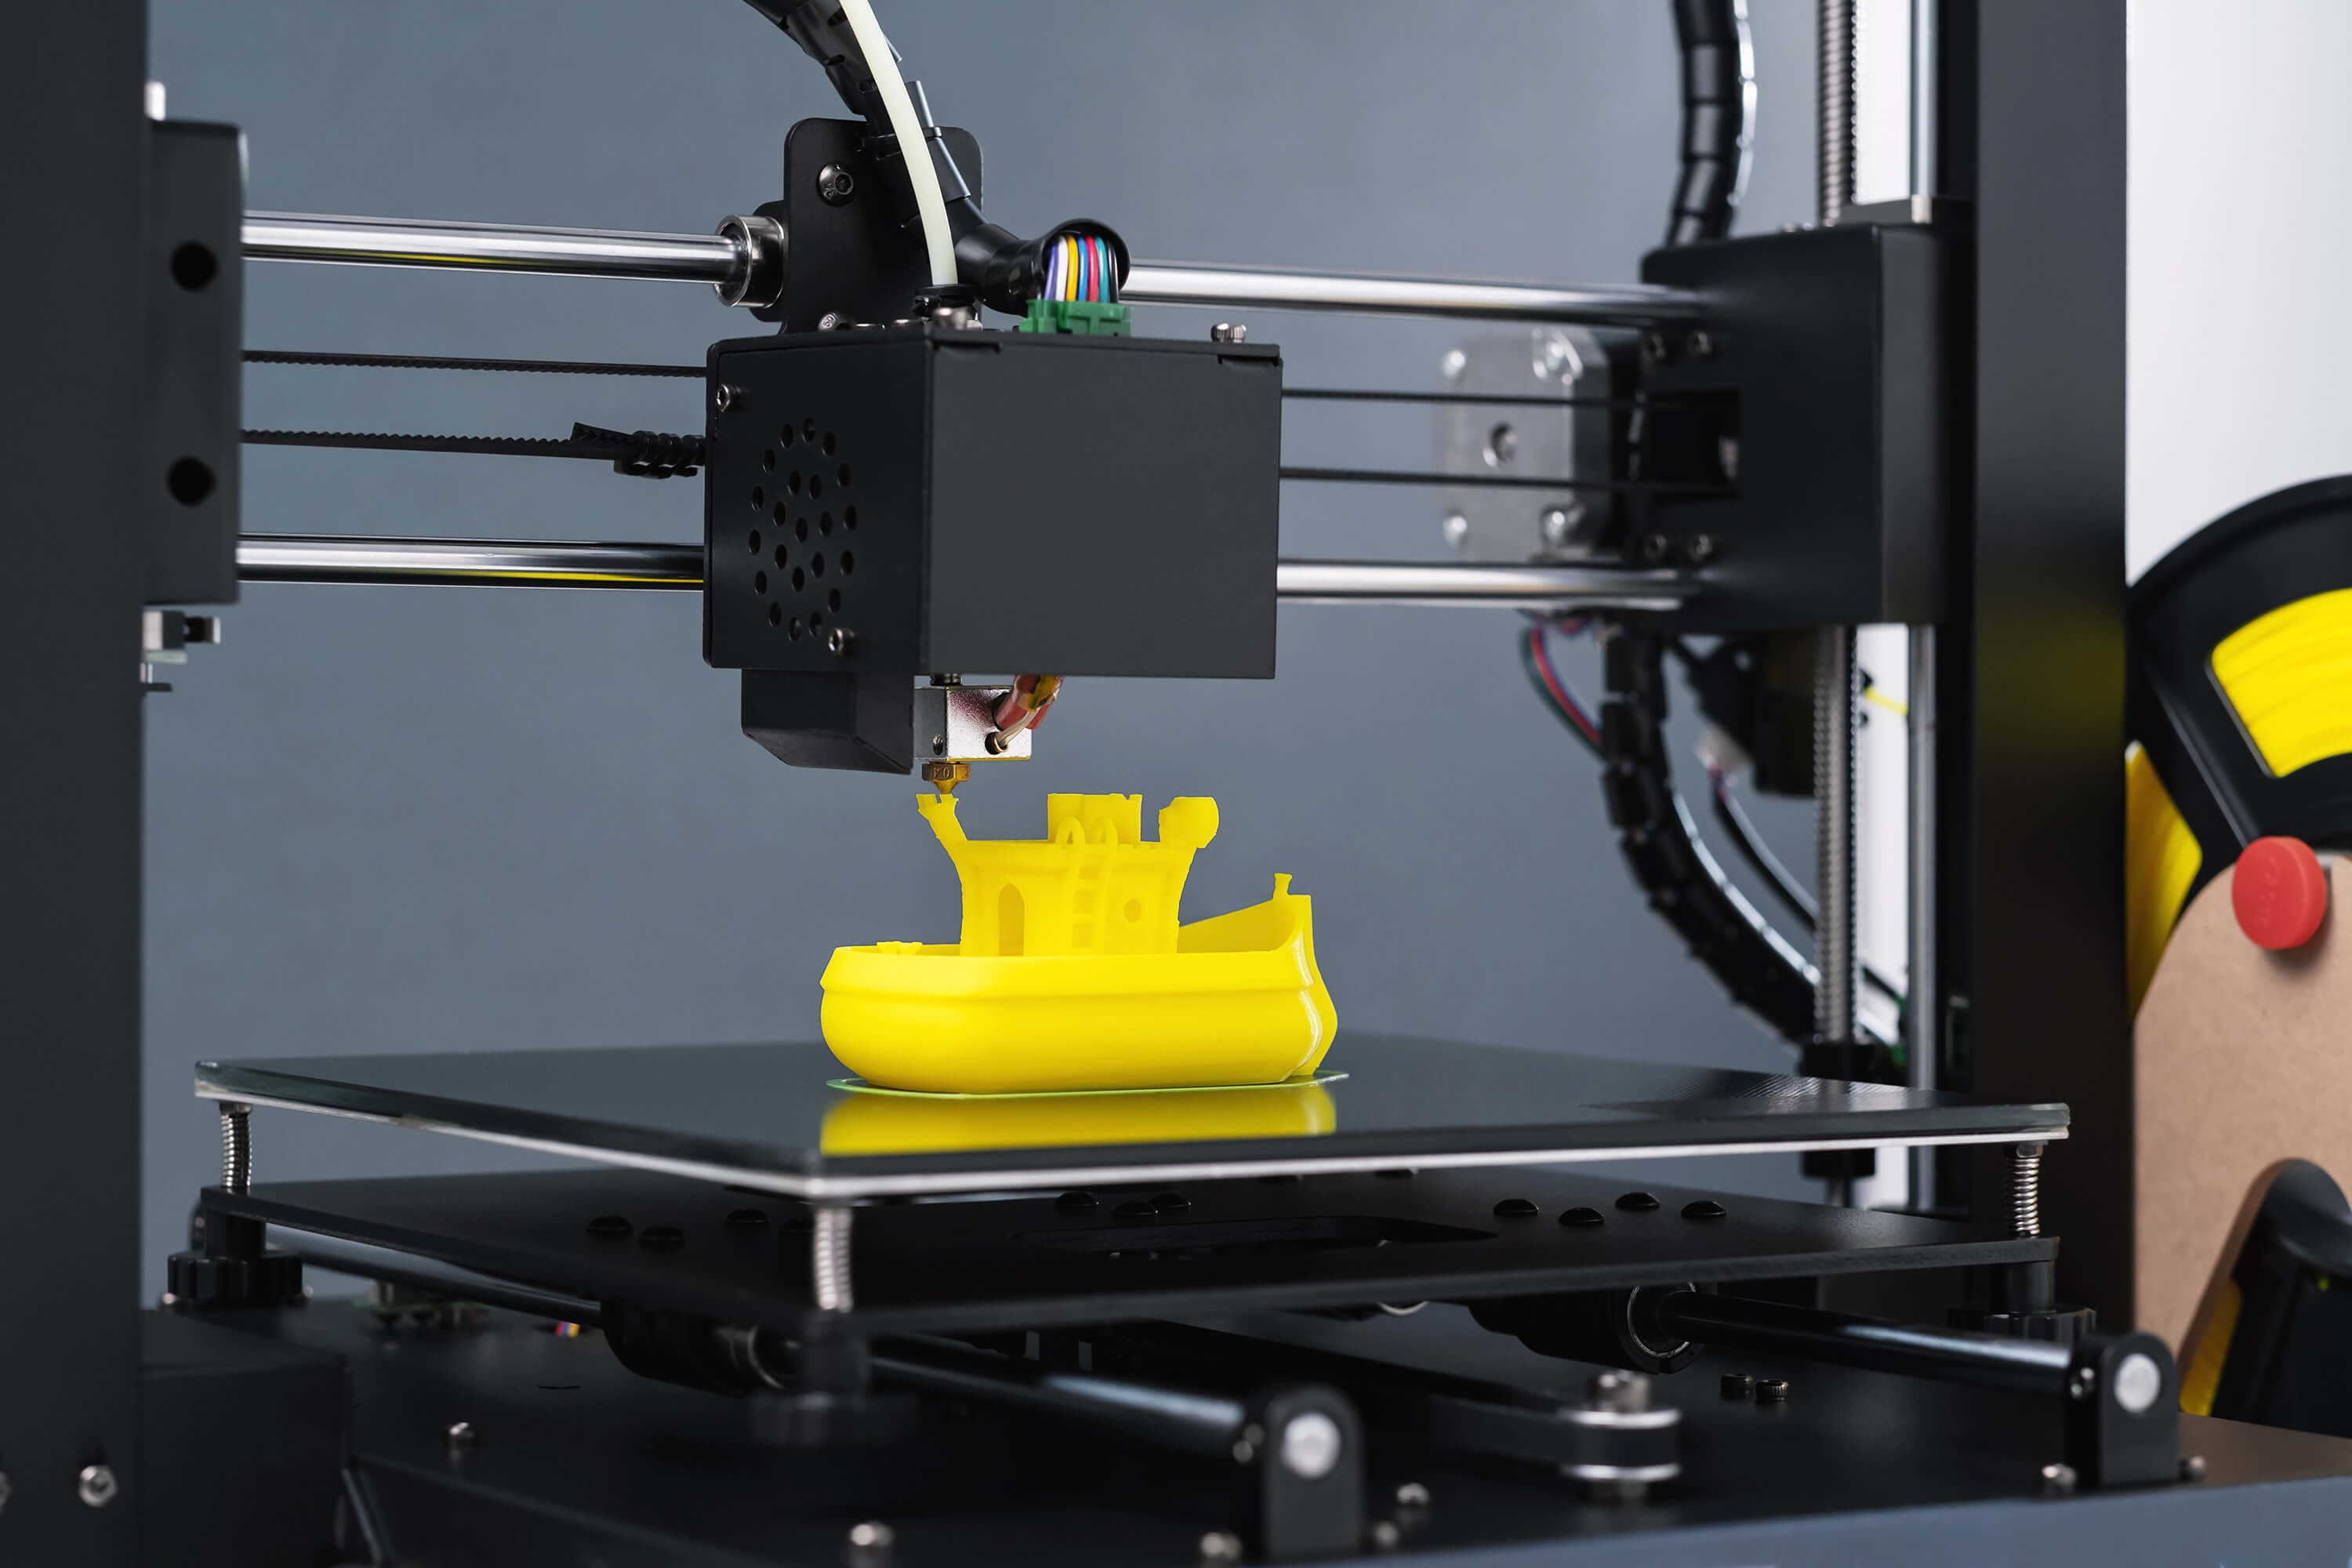 What Kind Of Output Does A 3D Printer Create?